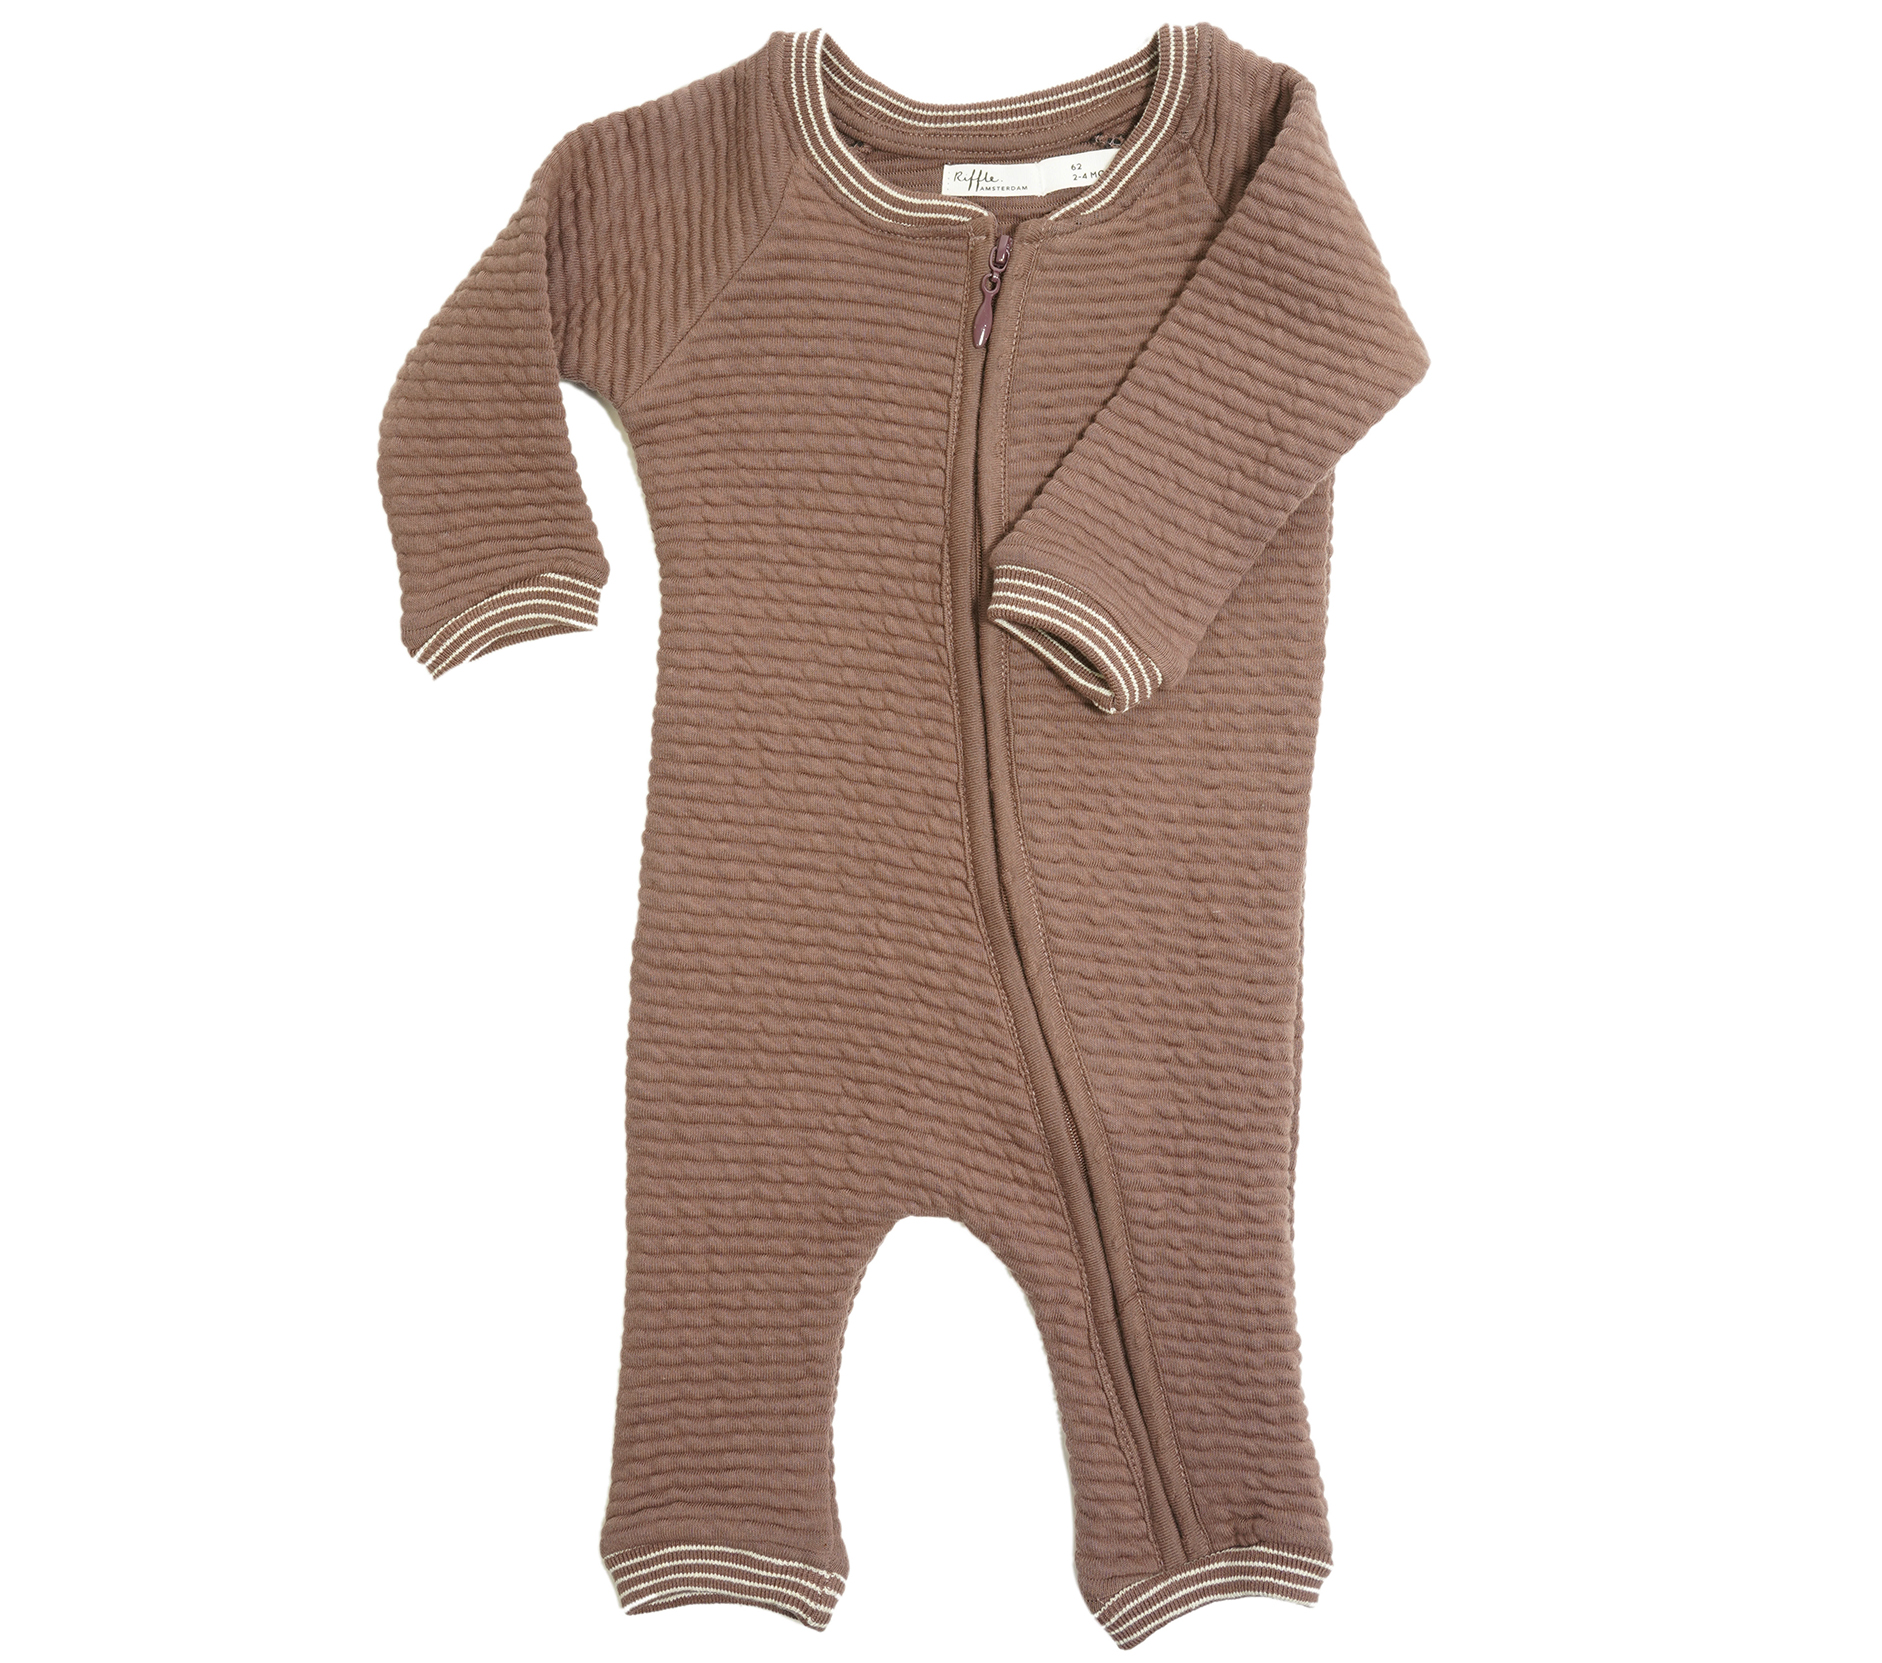 Riffle Baby Overall Suit Sari Jaquard Nuts